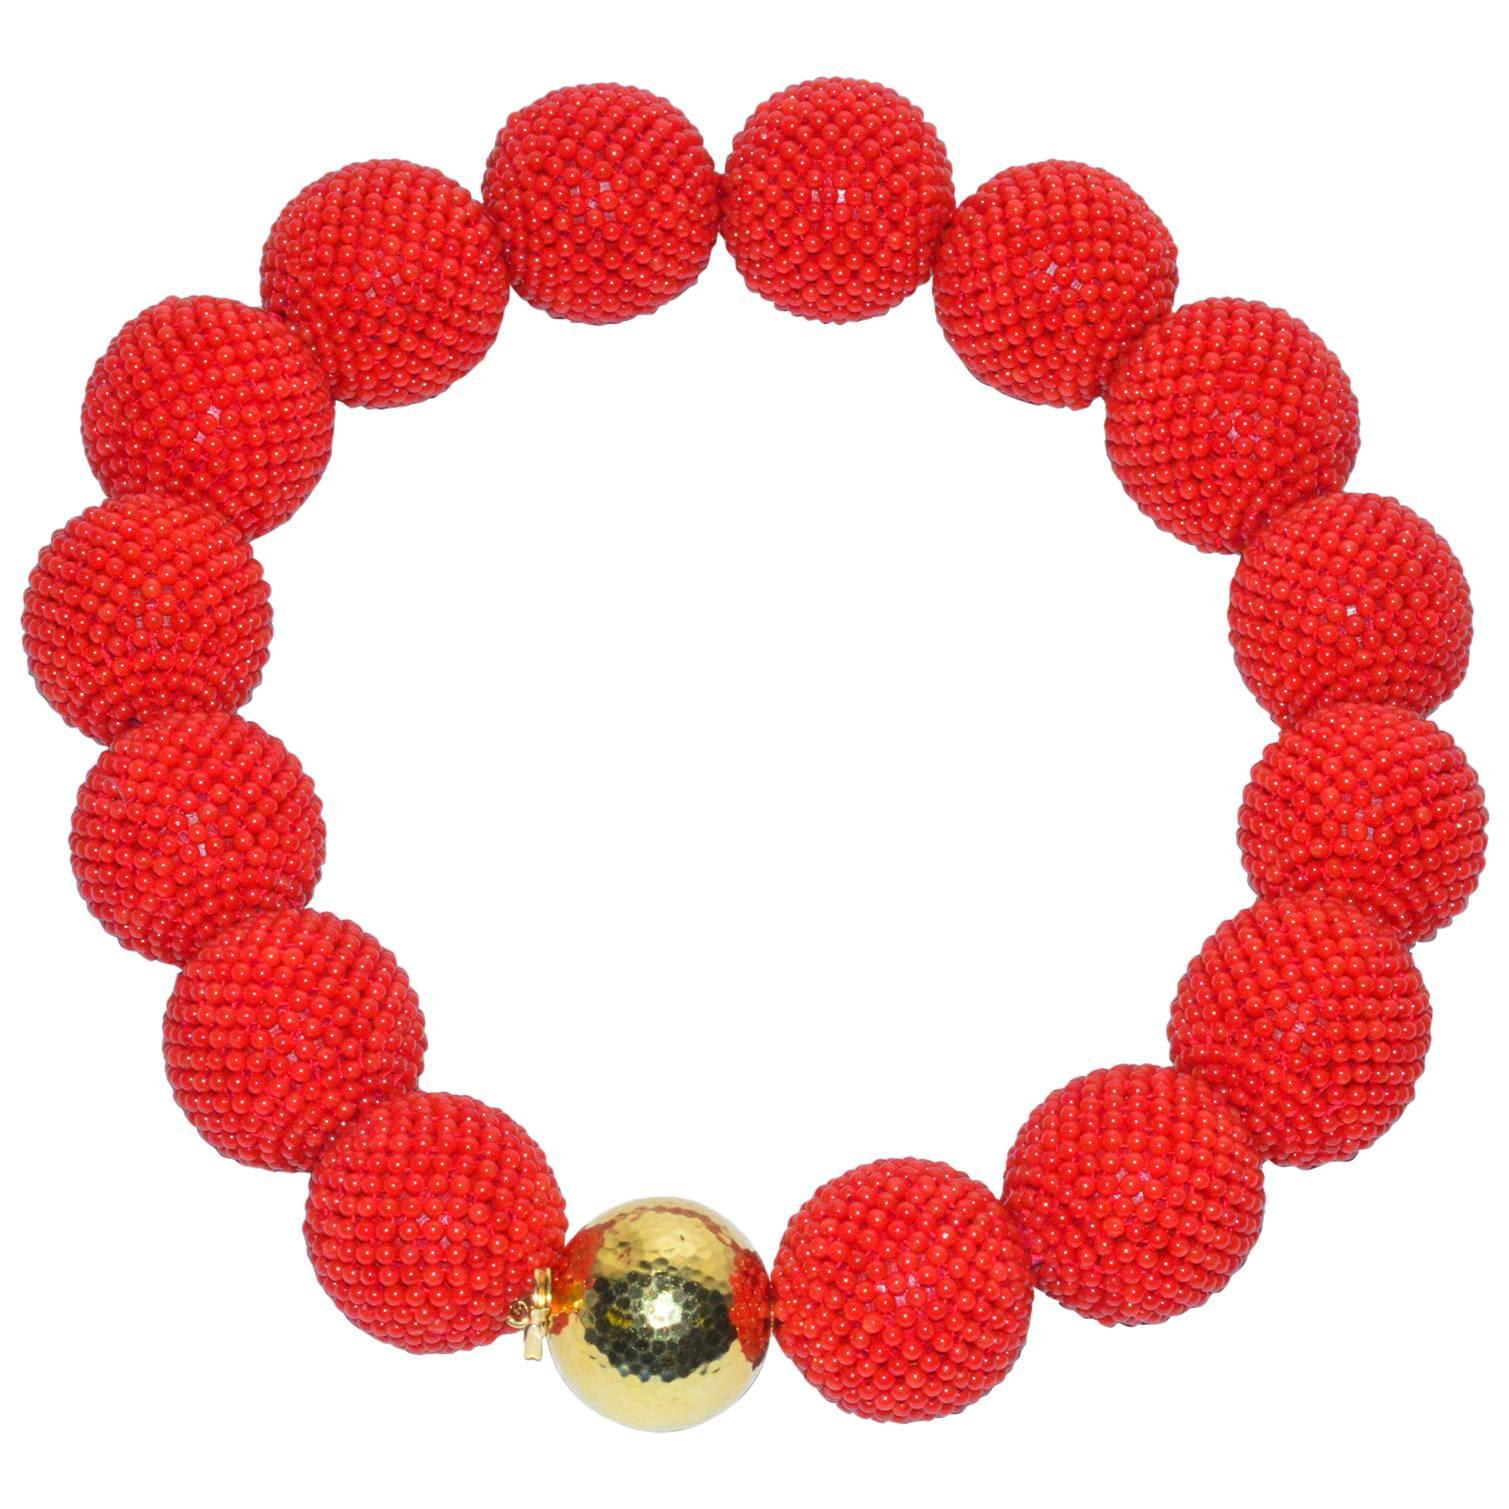 Enormous Valentin Magro Woven Coral Gold Bead Necklace For Sale